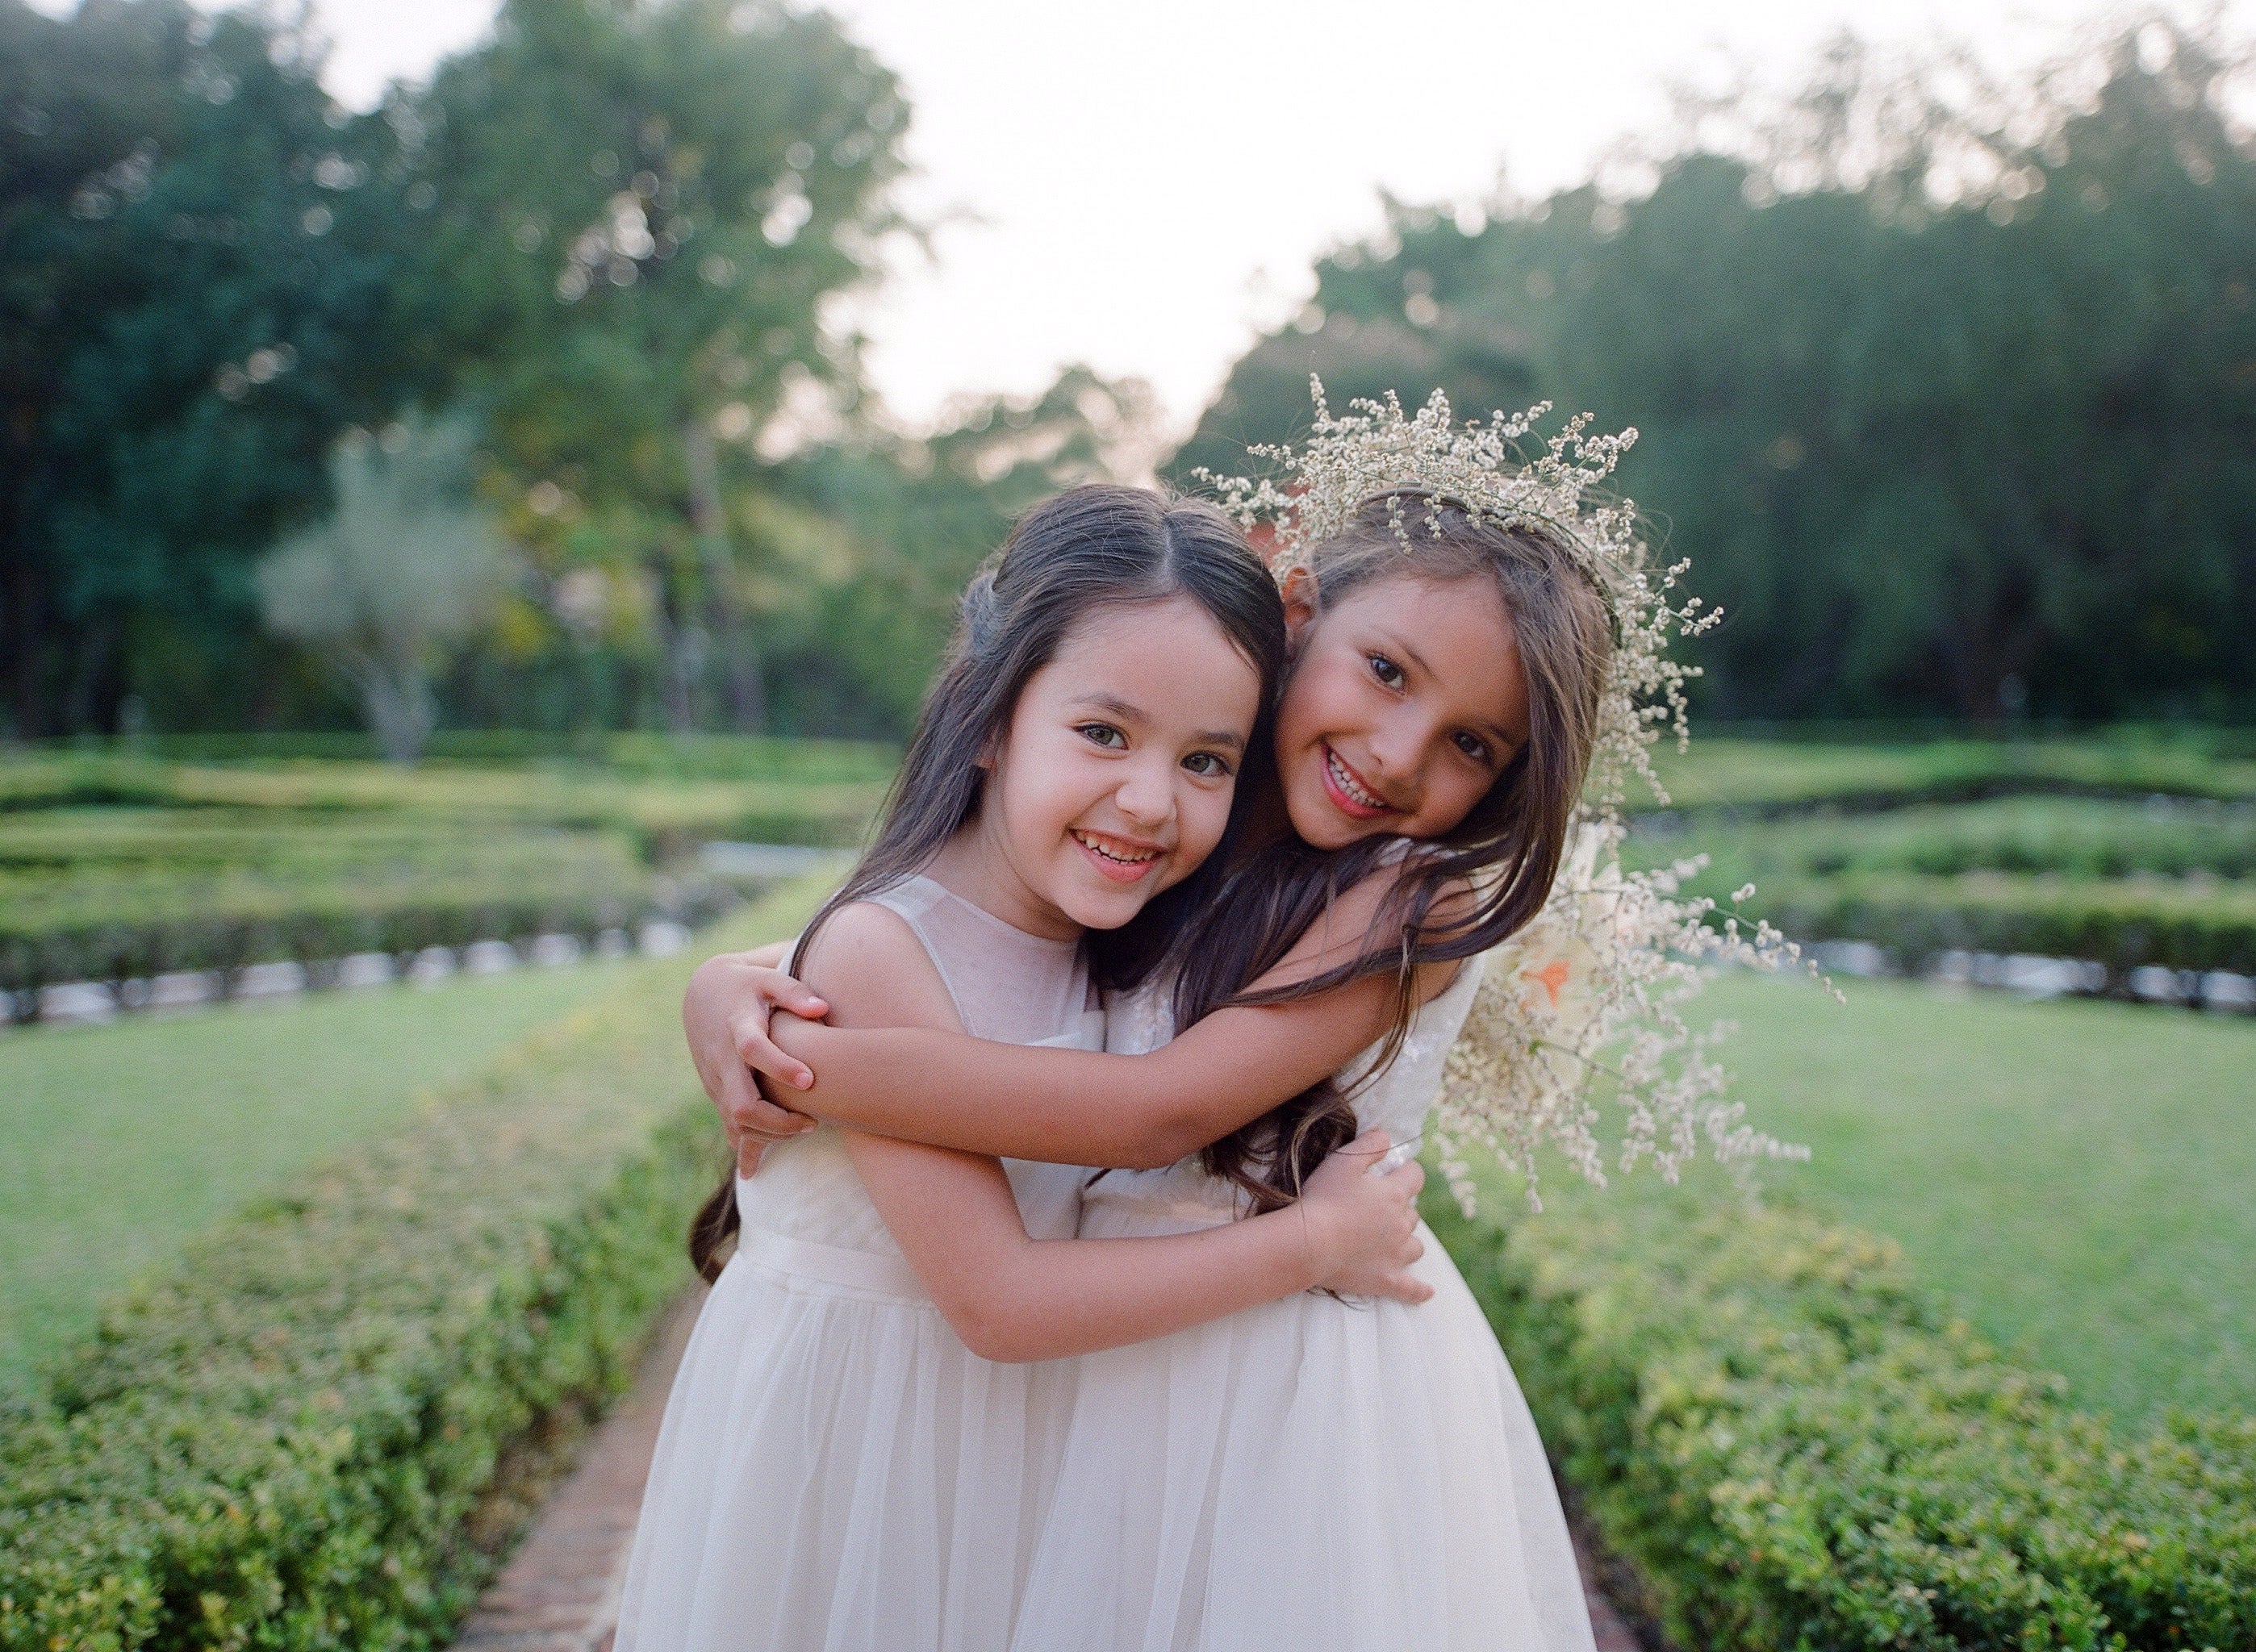 #KleinfeldEditorial We took our newest wedding dresses, bridesmaids dresses and flower girl dresses from Kleinfeld Bridal and Kleinfeld Bridal Party down to the Hacienda San Antonio in Colima Mexico for a stunning editorial photoshoot—here is all the adorable flower girl inspiration you need to get the perfect photos from your photographer!